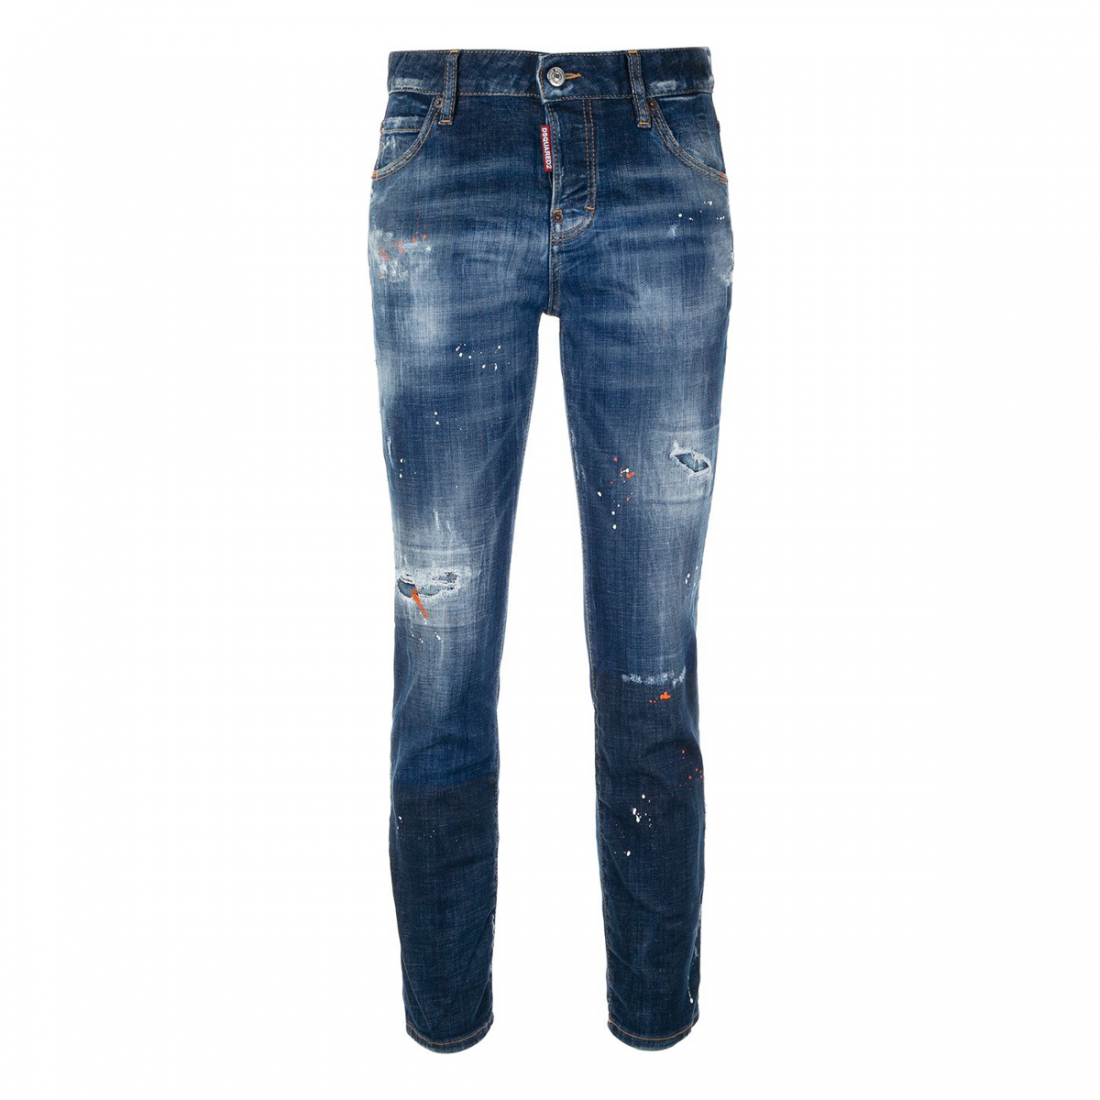 Women's 'Distressed' Jeans